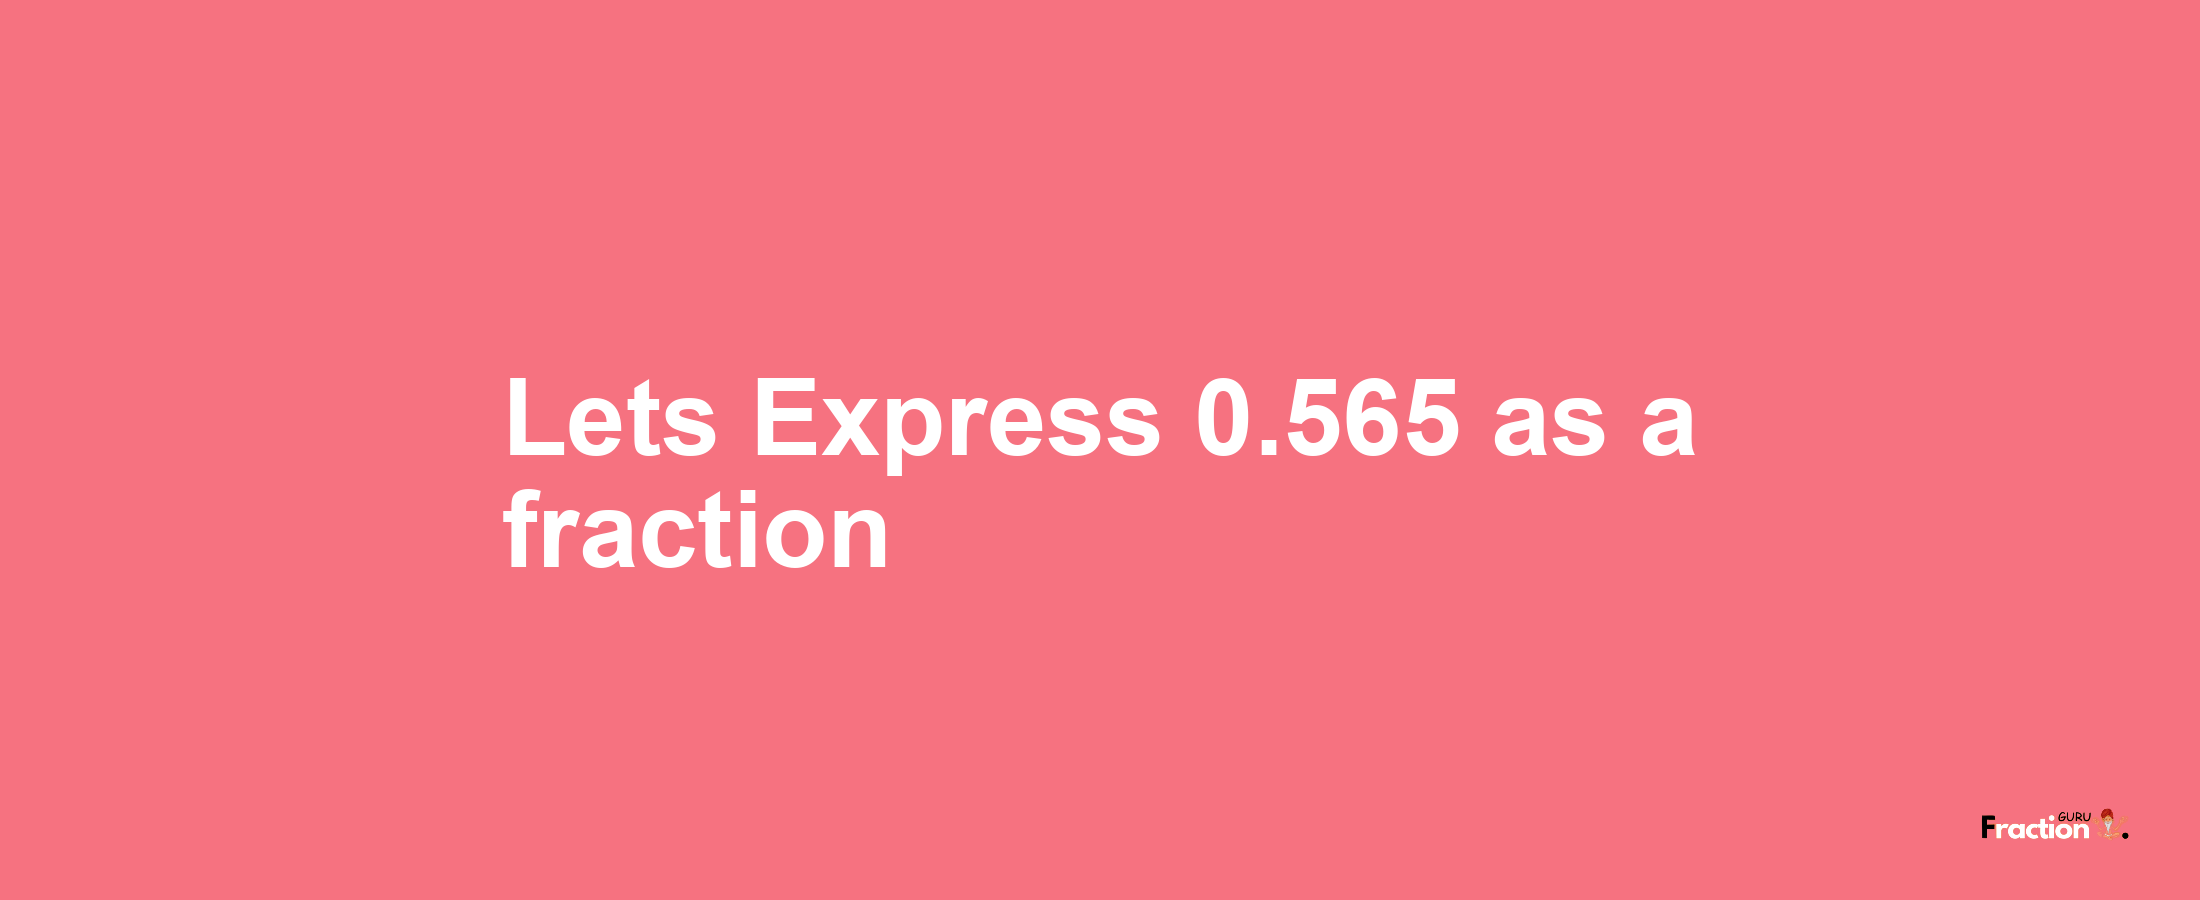 Lets Express 0.565 as afraction